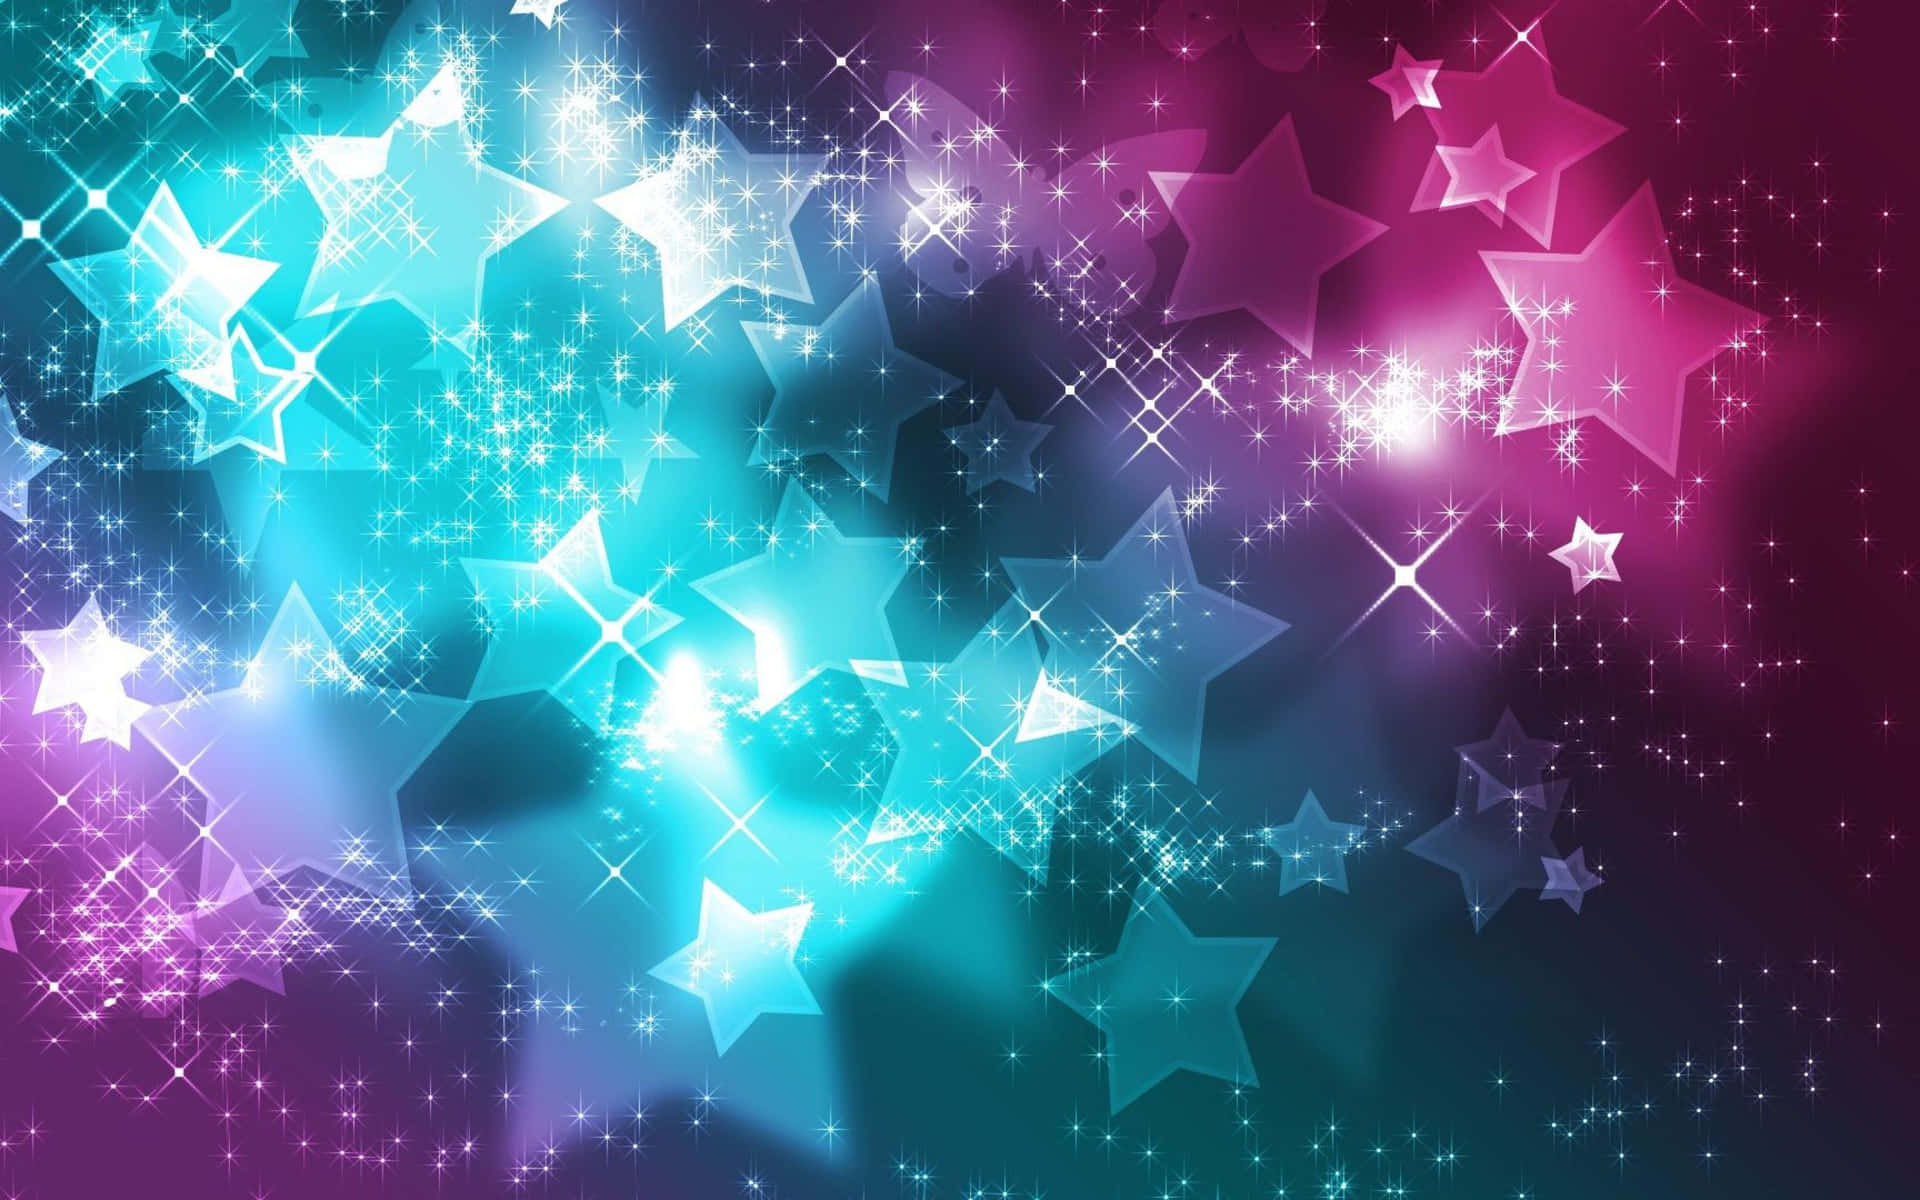 A beautiful image of a shining star made from a stunning array of colors. Wallpaper